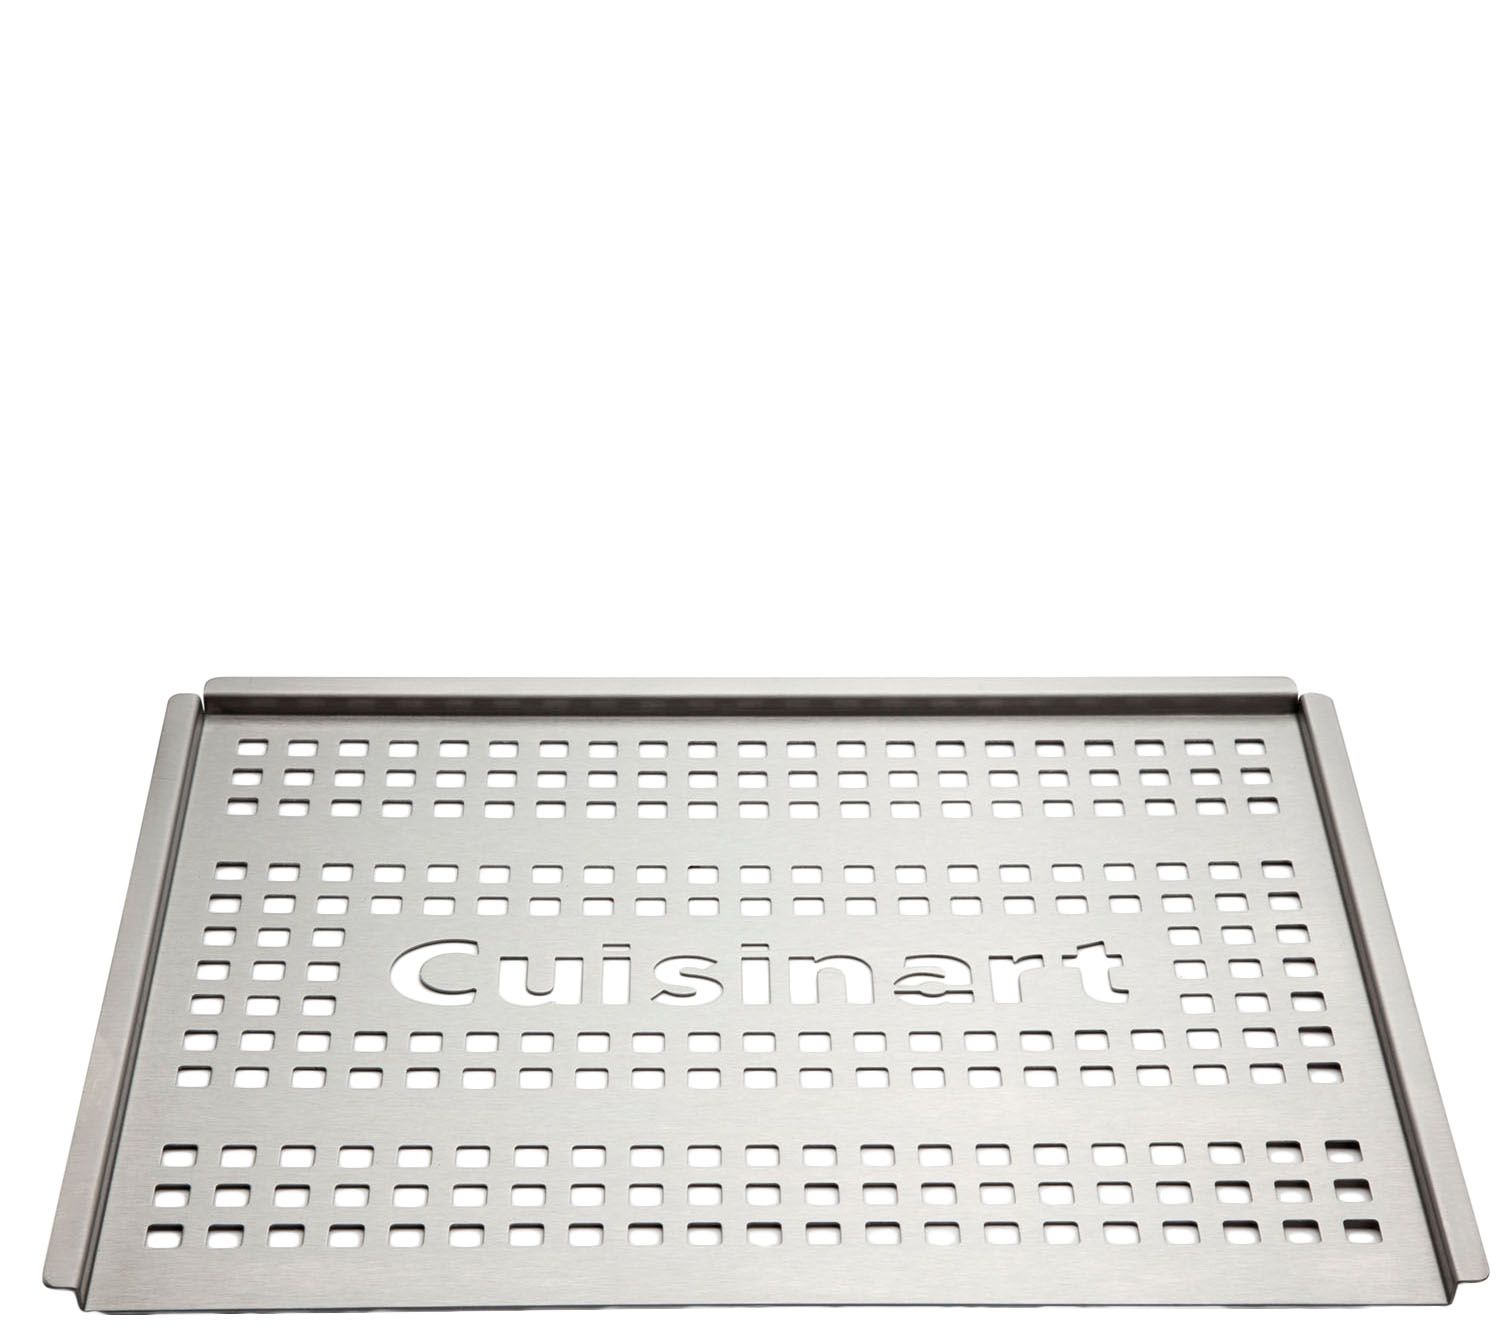 Cuisinart 12" x 16" Stainless Steel Grill Topper - QVC.com Cuisinart Stainless Steel Grill Topper